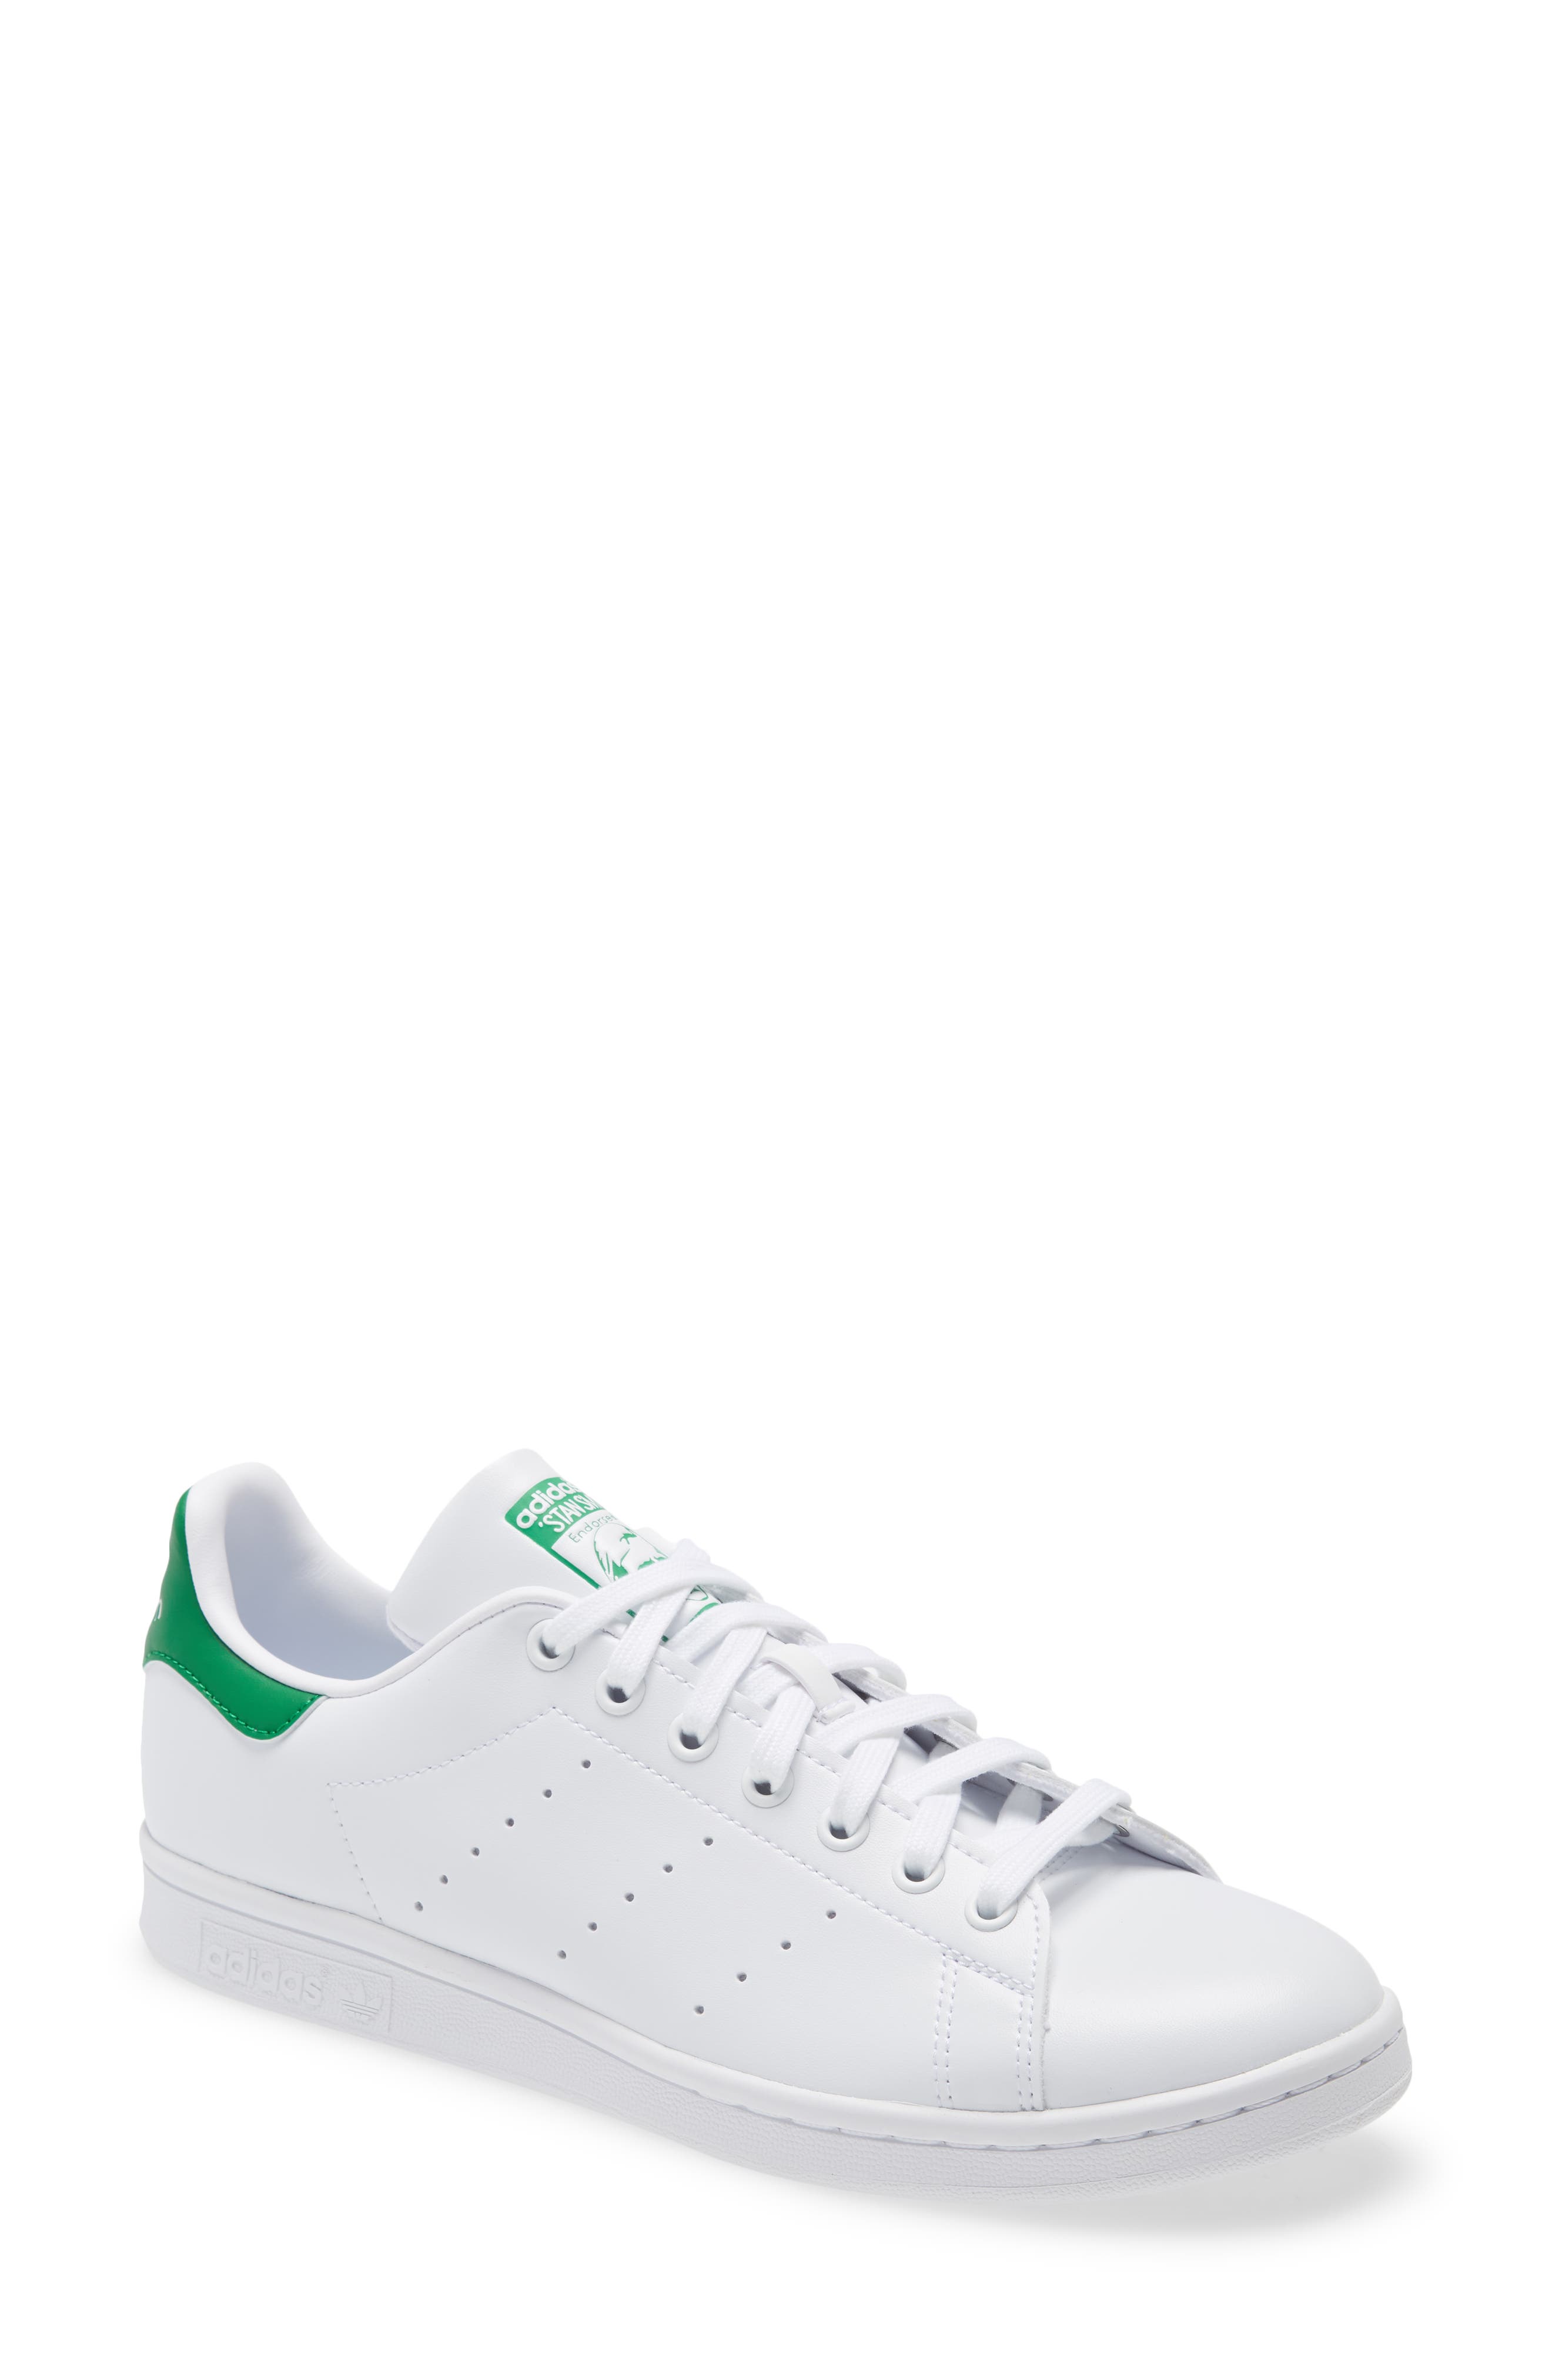 adidas Stan Smith Low Top Sneaker in White/White/Collegiate Navy at Nordstrom